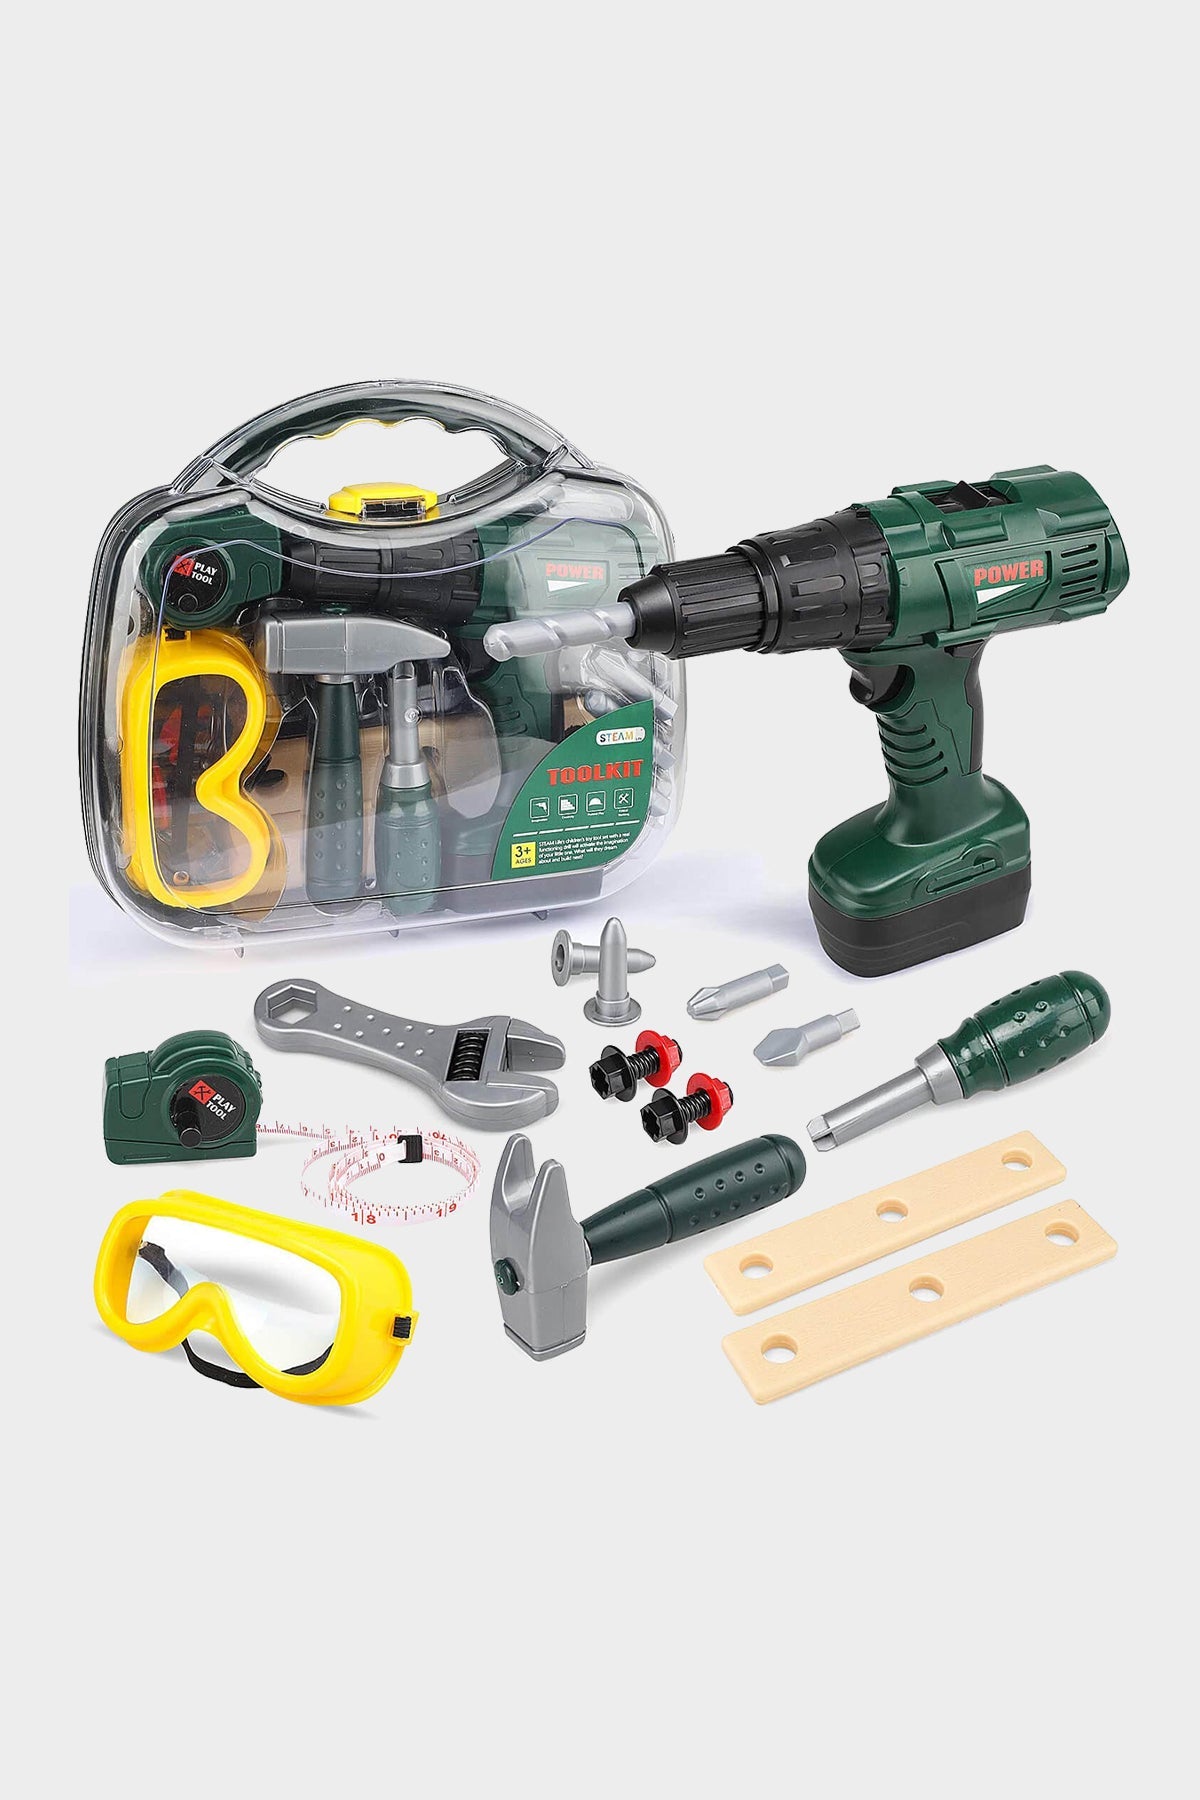 Kids Tool Set with Power Toy Drill - shop-olivia.com